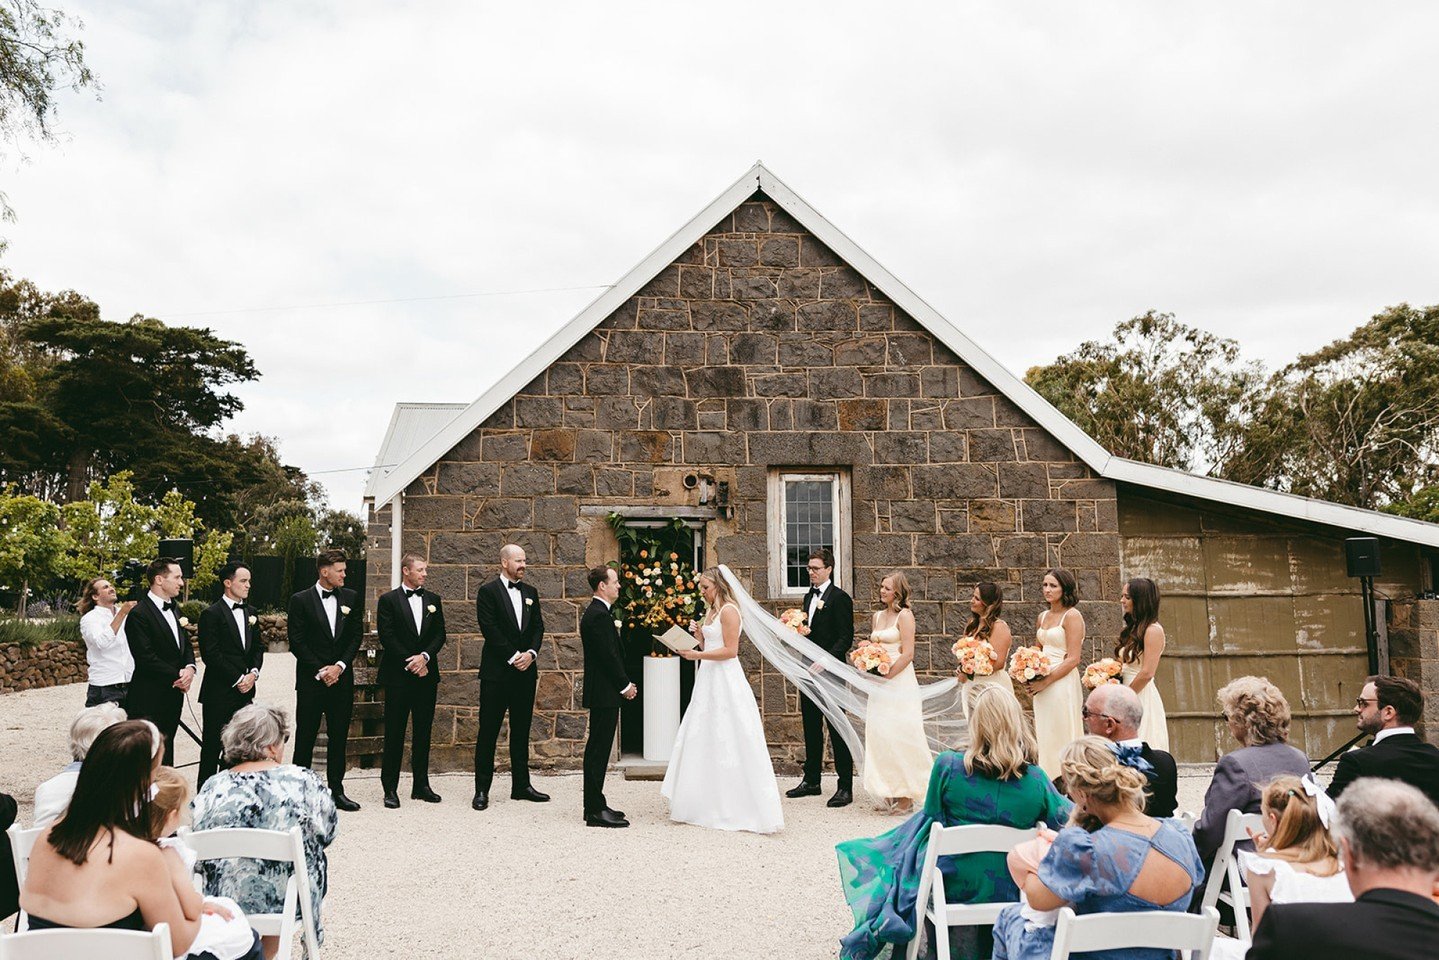 Elizabeth &amp; Andy 🤍

Vows hit different in this light. 

Photo: @megreadphotography
Video: @mountain_duck_weddings
Venue: @woolbrookhomestead
Flowers: @sophieholloway_flowers_gardens
Catering: @smithandcofoods
Celebrant: @lovejane_celebrant
Cerem